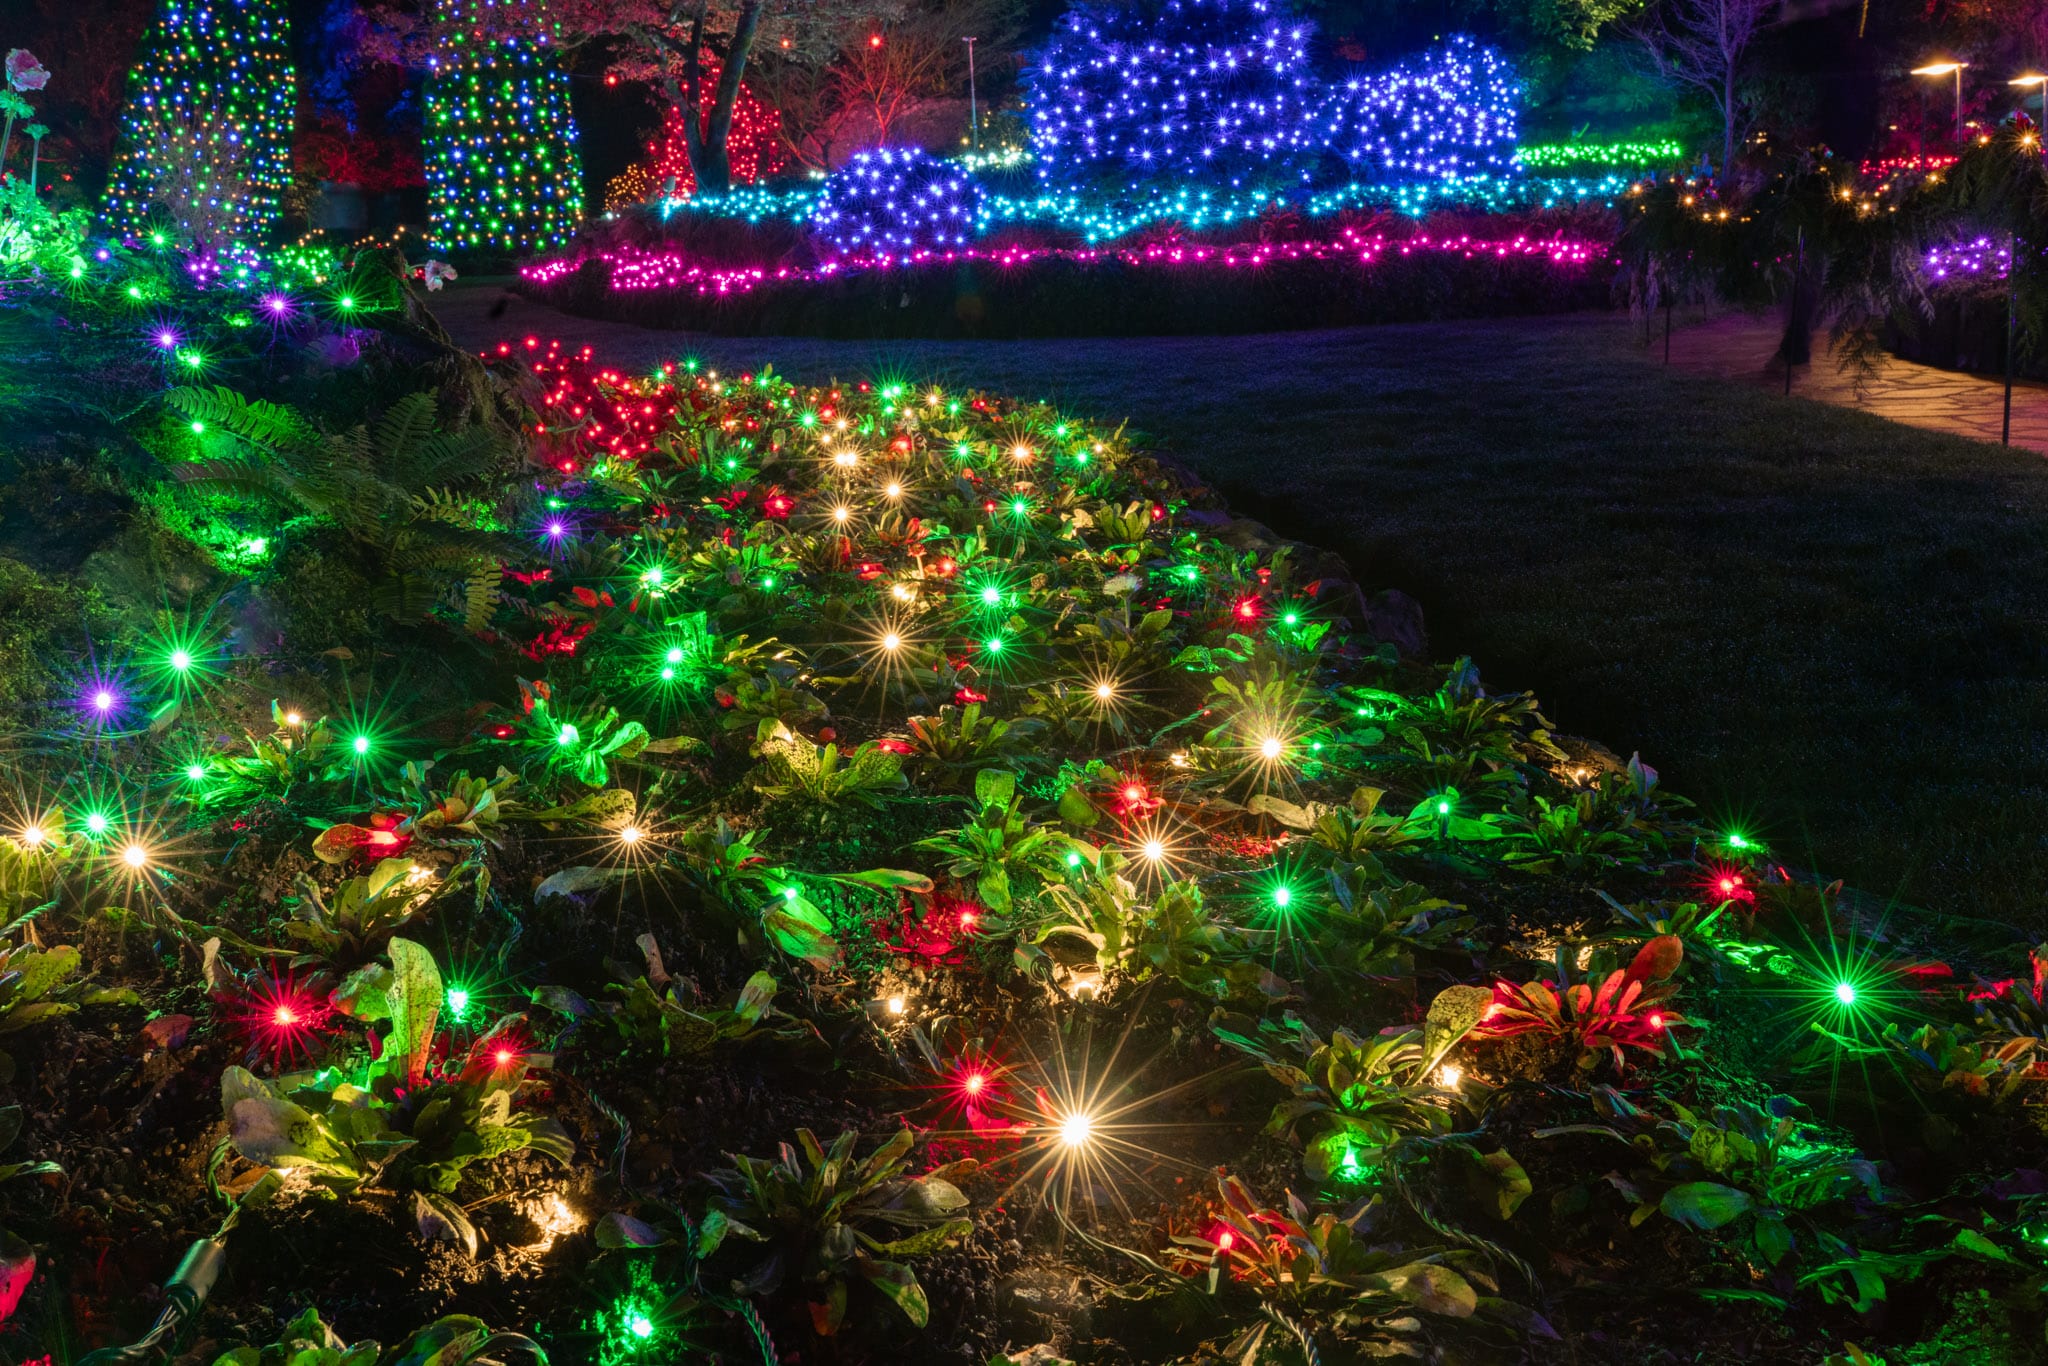 Colourful lighting illuminates bushes and trees at a large outdoor garden in Victoria, BC.